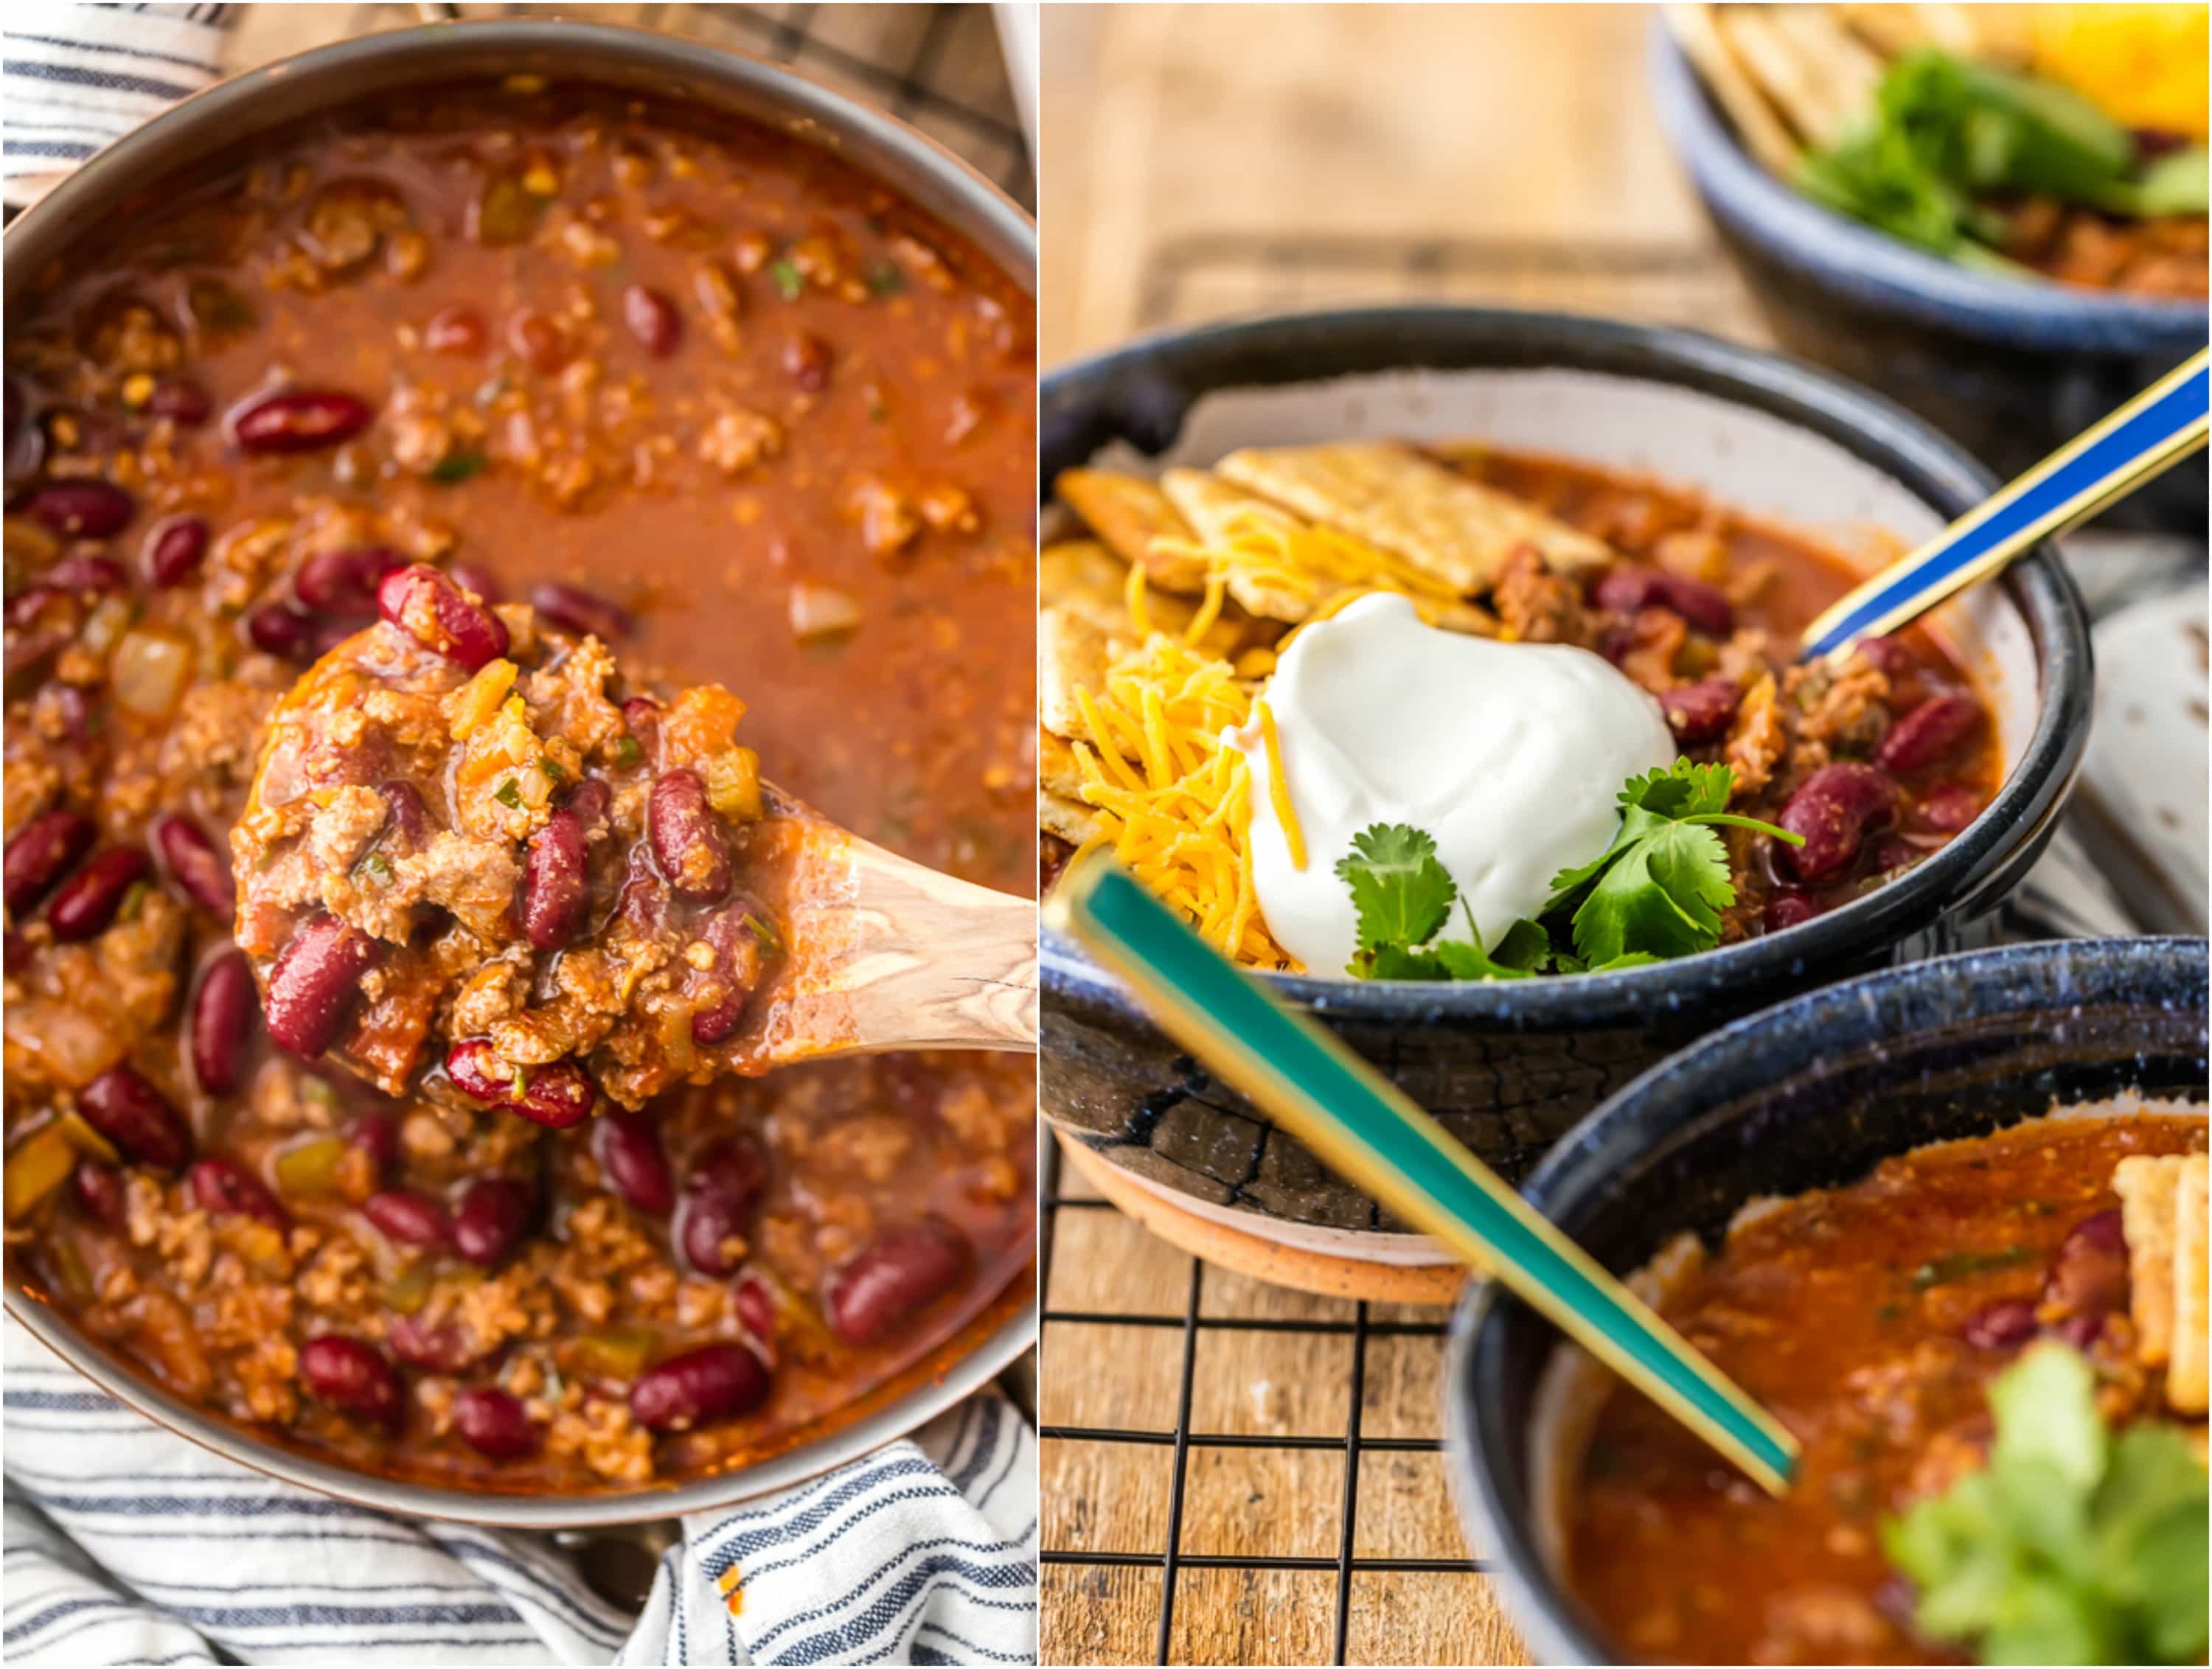 This is the BEST EASY CHILI RECIPE! Our 6 Ingredient Lazy Day Chili is one of our favorite recipes to make for a crowd. It's so easy and so flavorful! Since it only contains 6 ingredients, you most likely already have this stuff in your pantry. It's perfect for game day and absolutely fool-proof. You won't believe how tasty this easy chili recipe is!